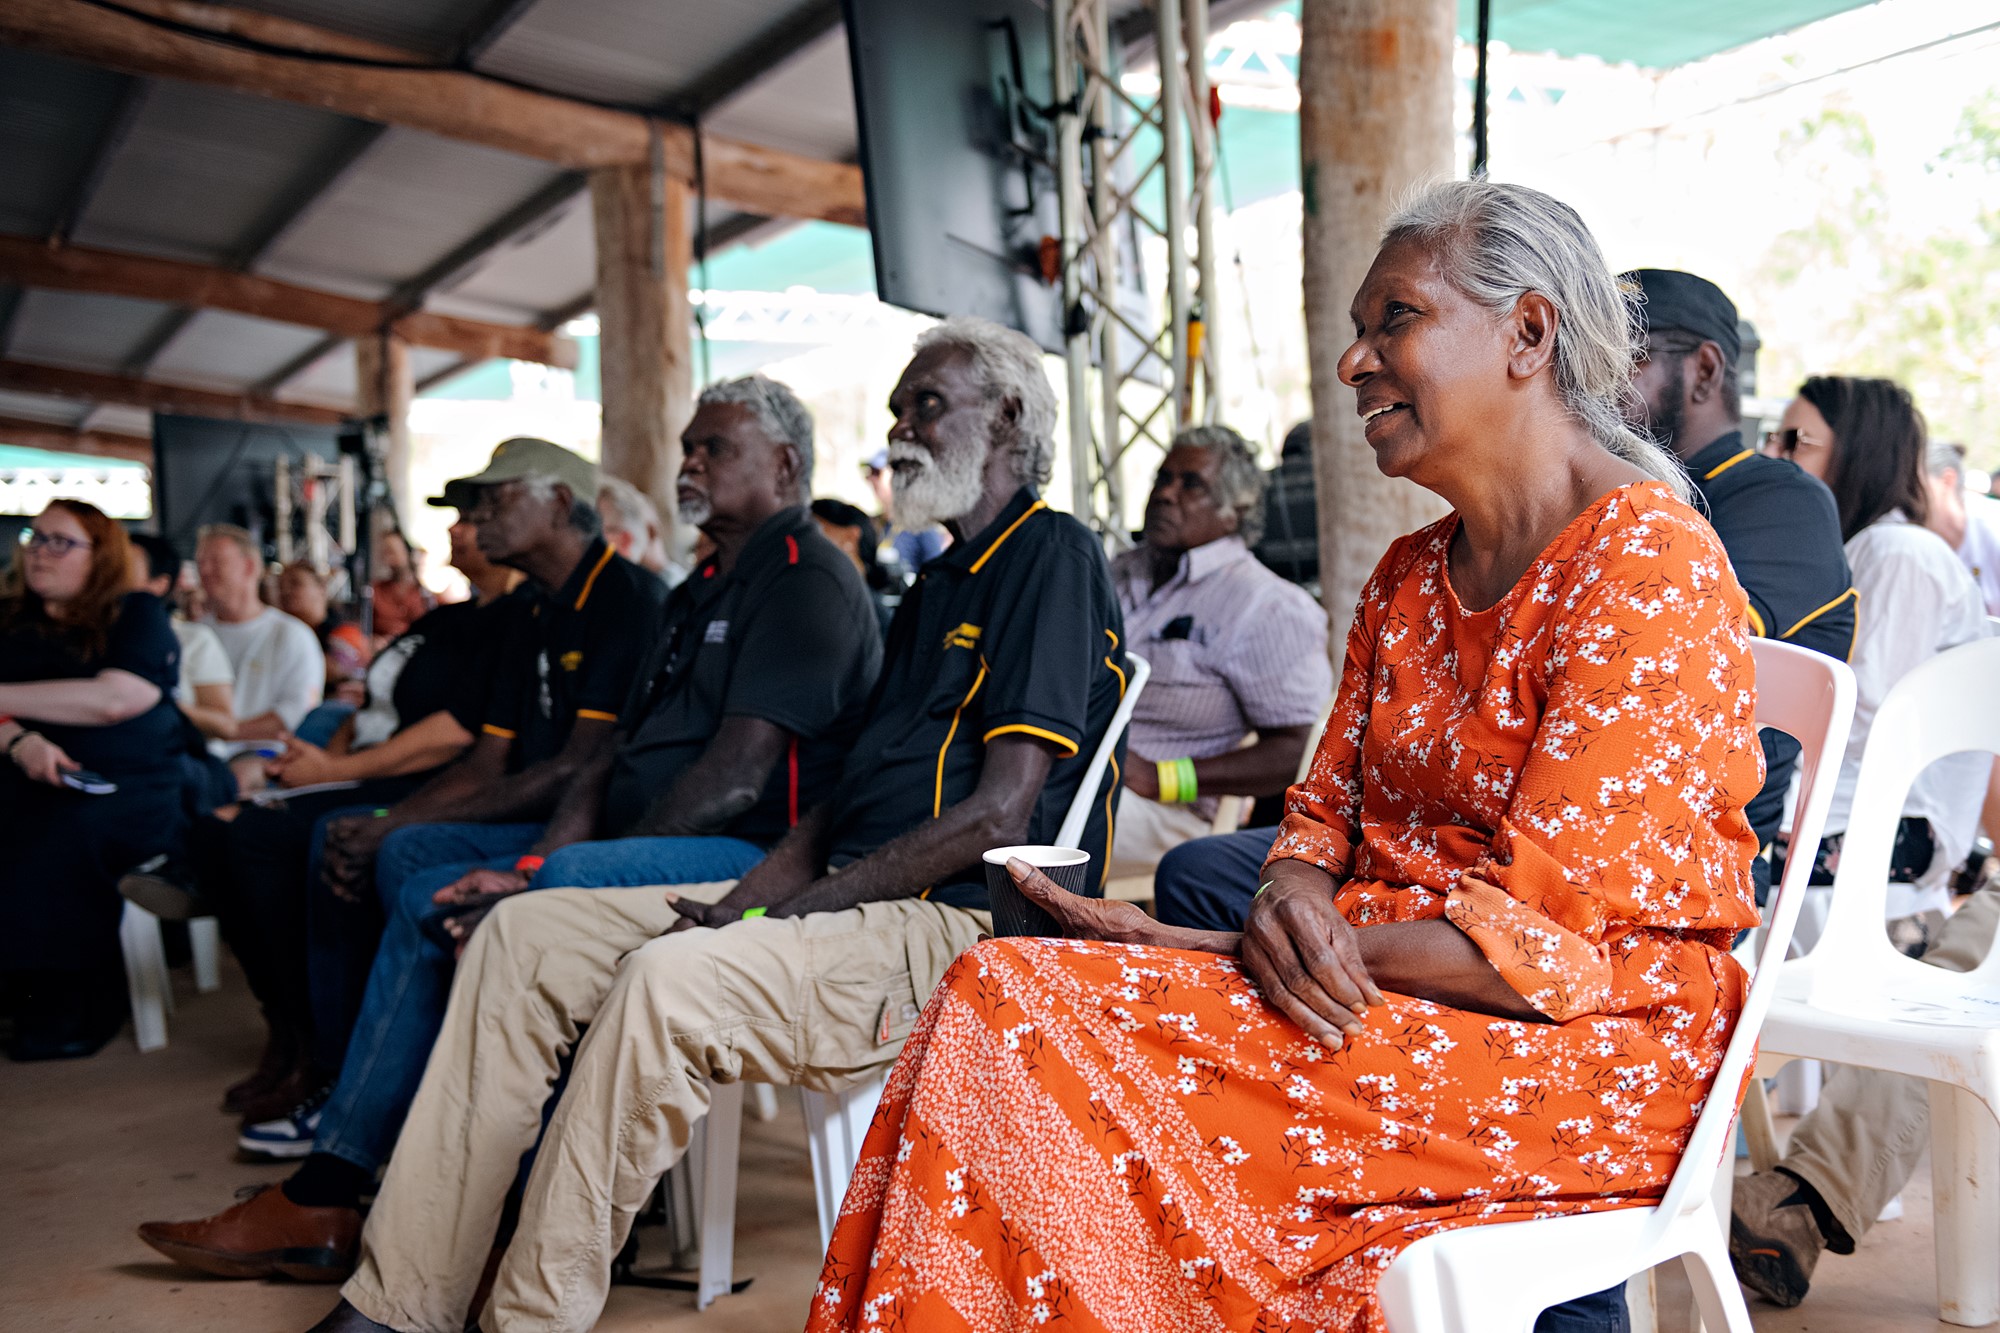 Indigenous elders sitting in the audience and listening to the speech.